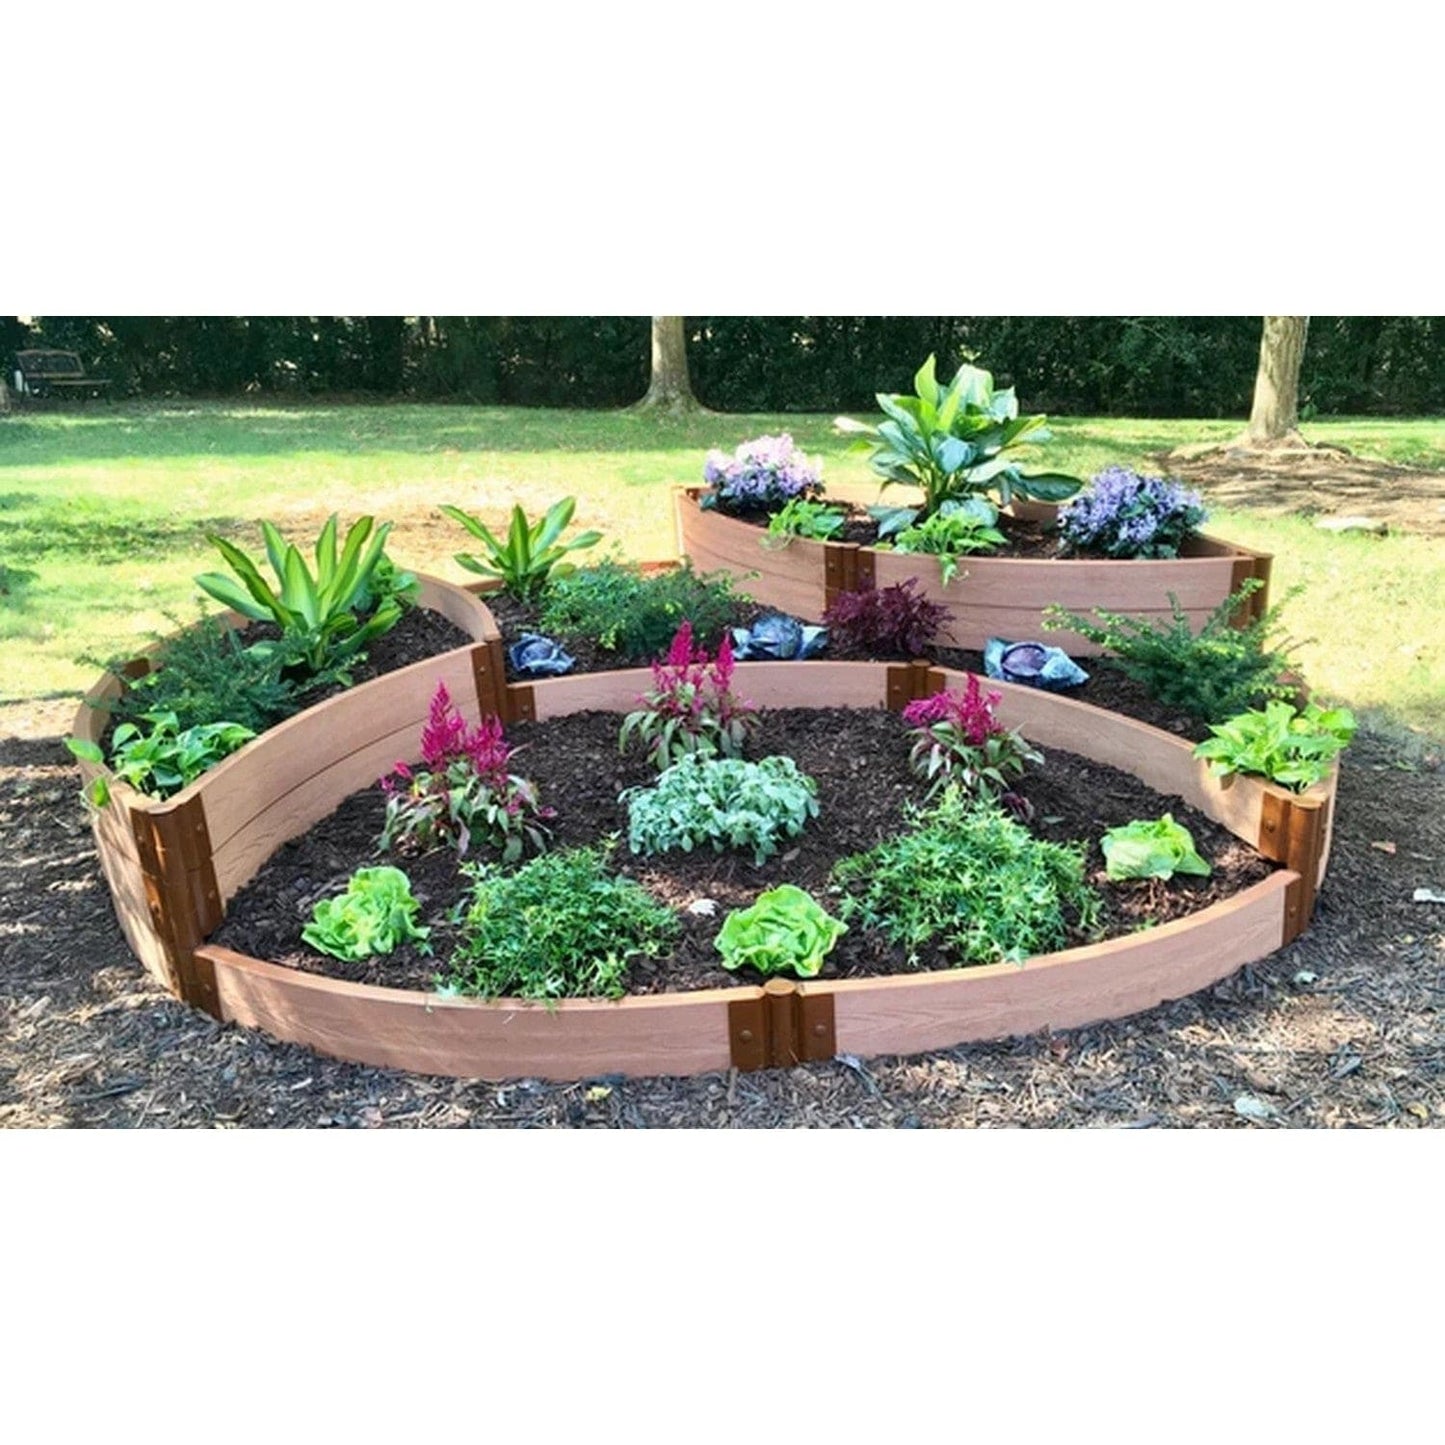 Frame It All Gardening Accessories Frame It All | Tool-Free Circle Quadruple Raised Garden Bed 10' X 10' X 22" - Weathered Wood - 1" Profile 800001042